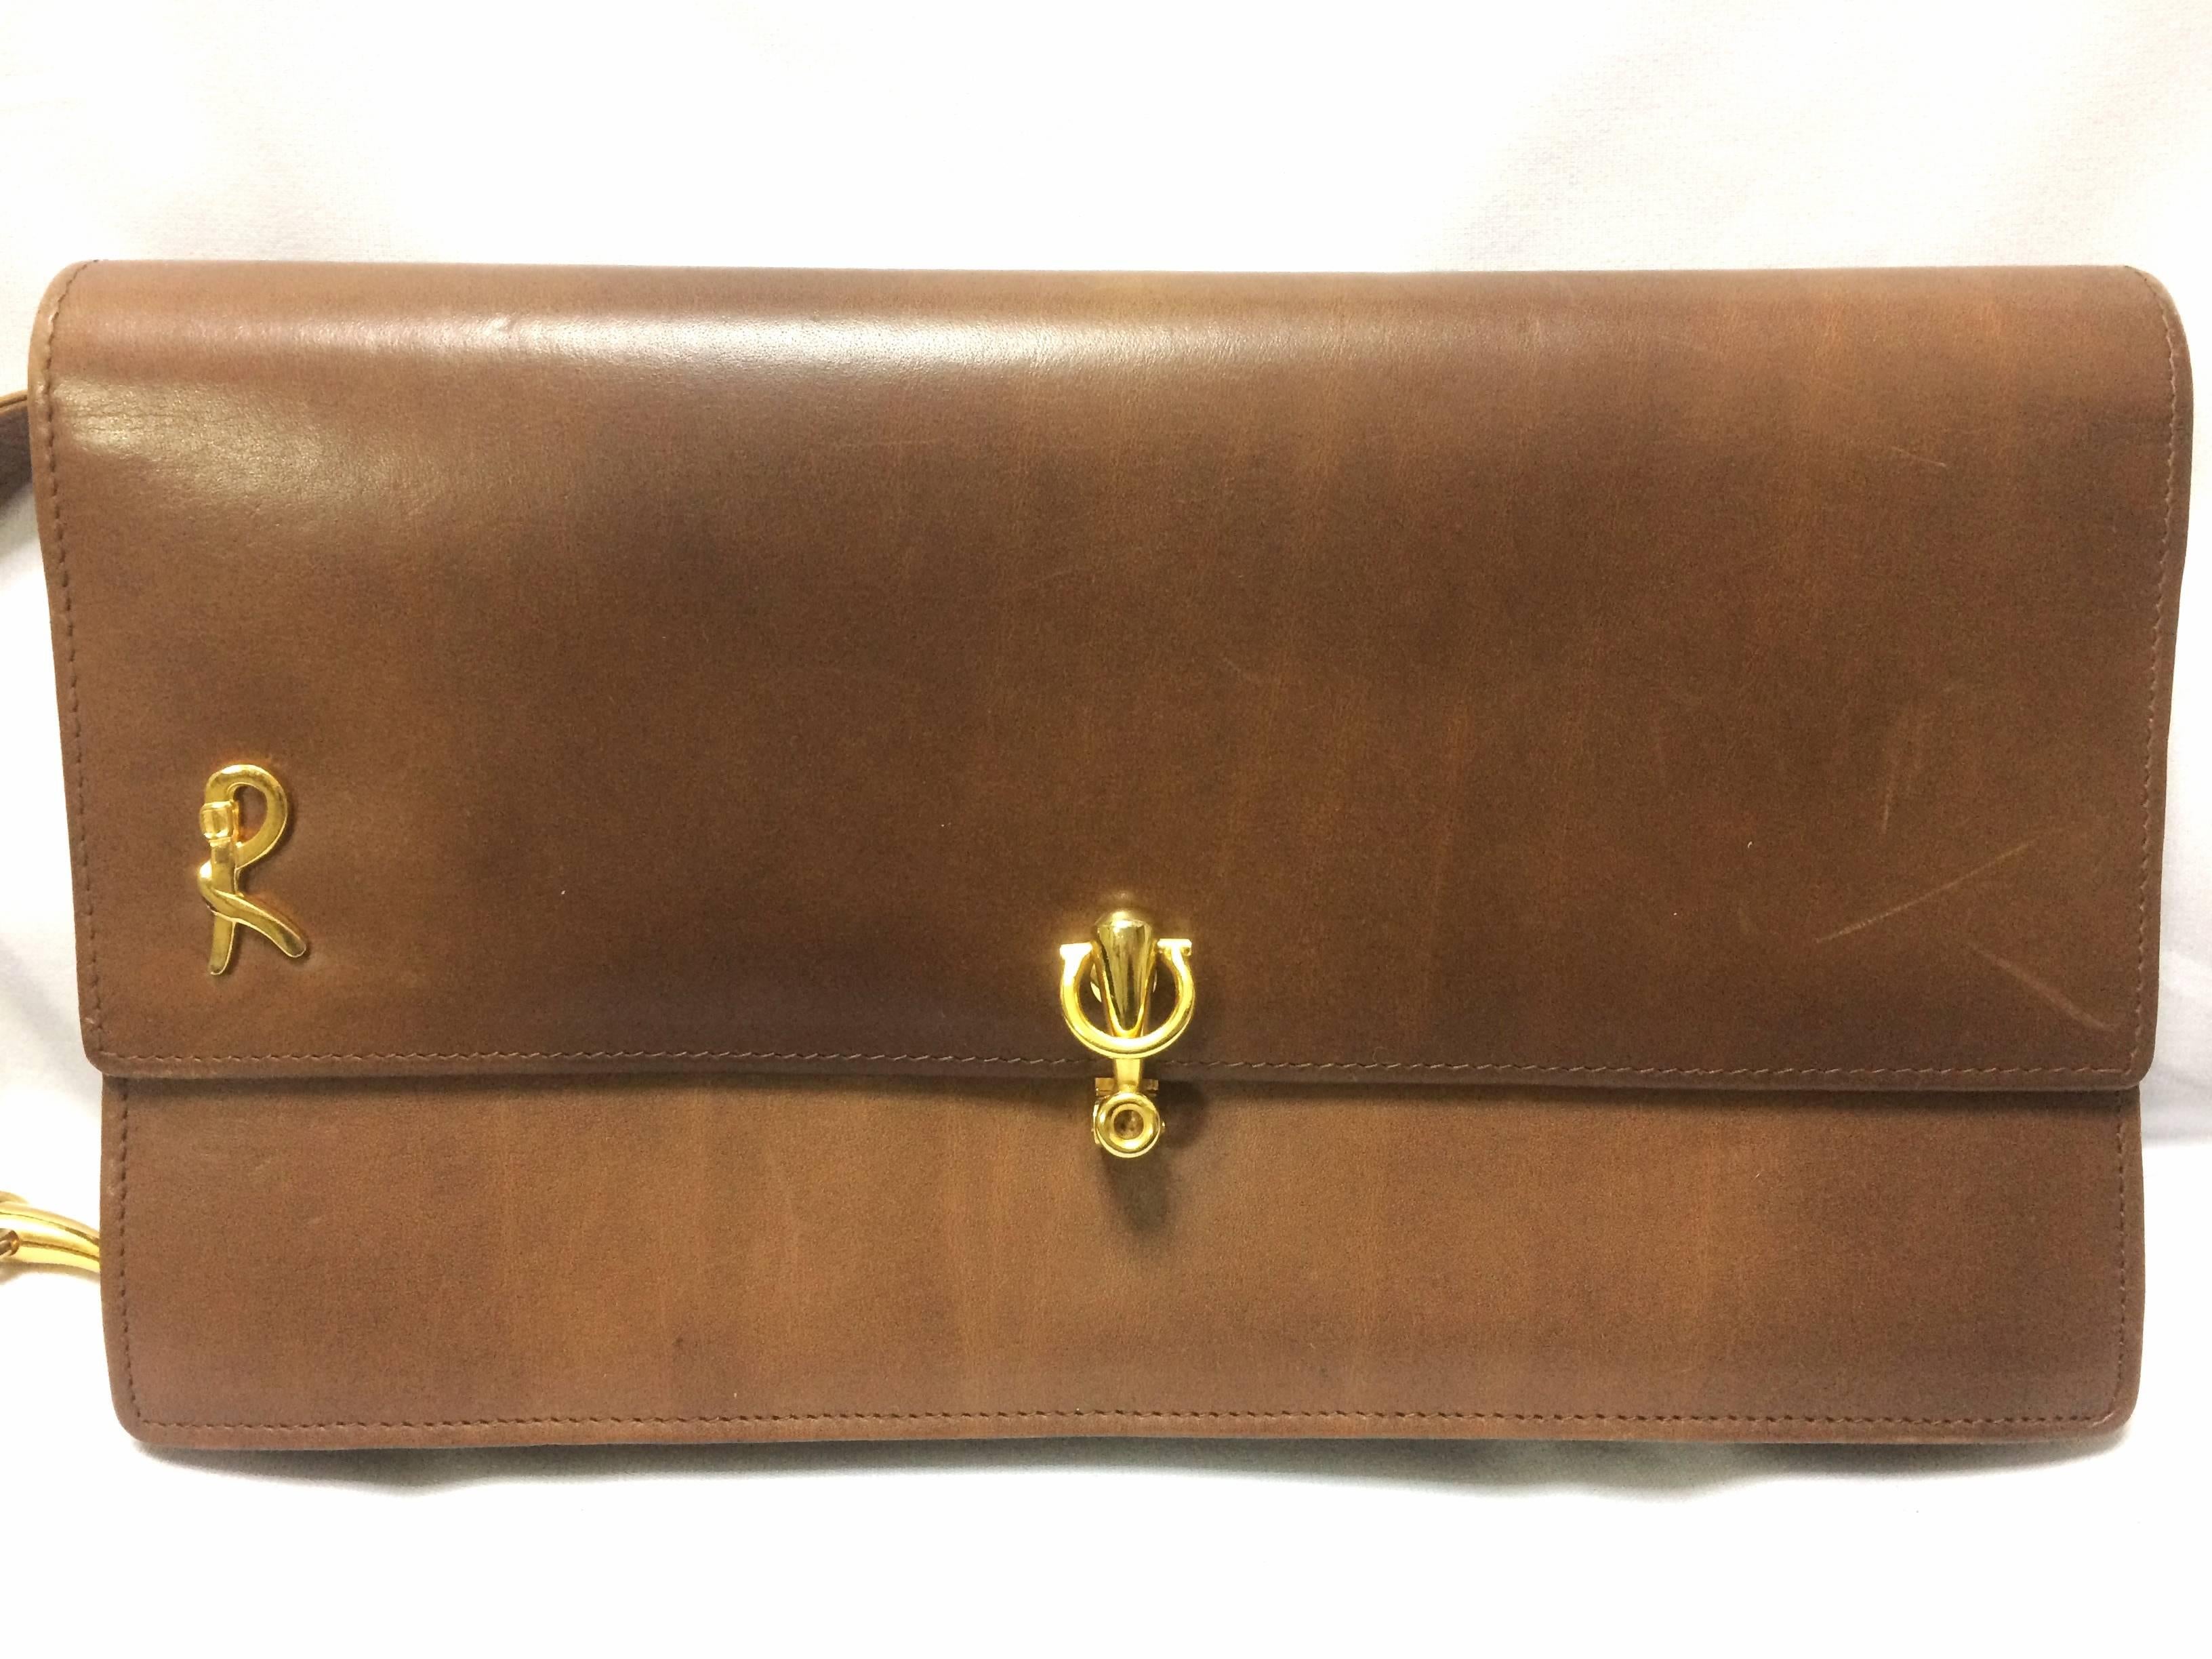 1970's vintage Roberta di Camerino brown leather chain shoulder bag with golden R logo motif. Classic purse.

Introducing another classic purse from Roberta di Camerino back in the 70's. 
Brown leather bag with chain and leather combo